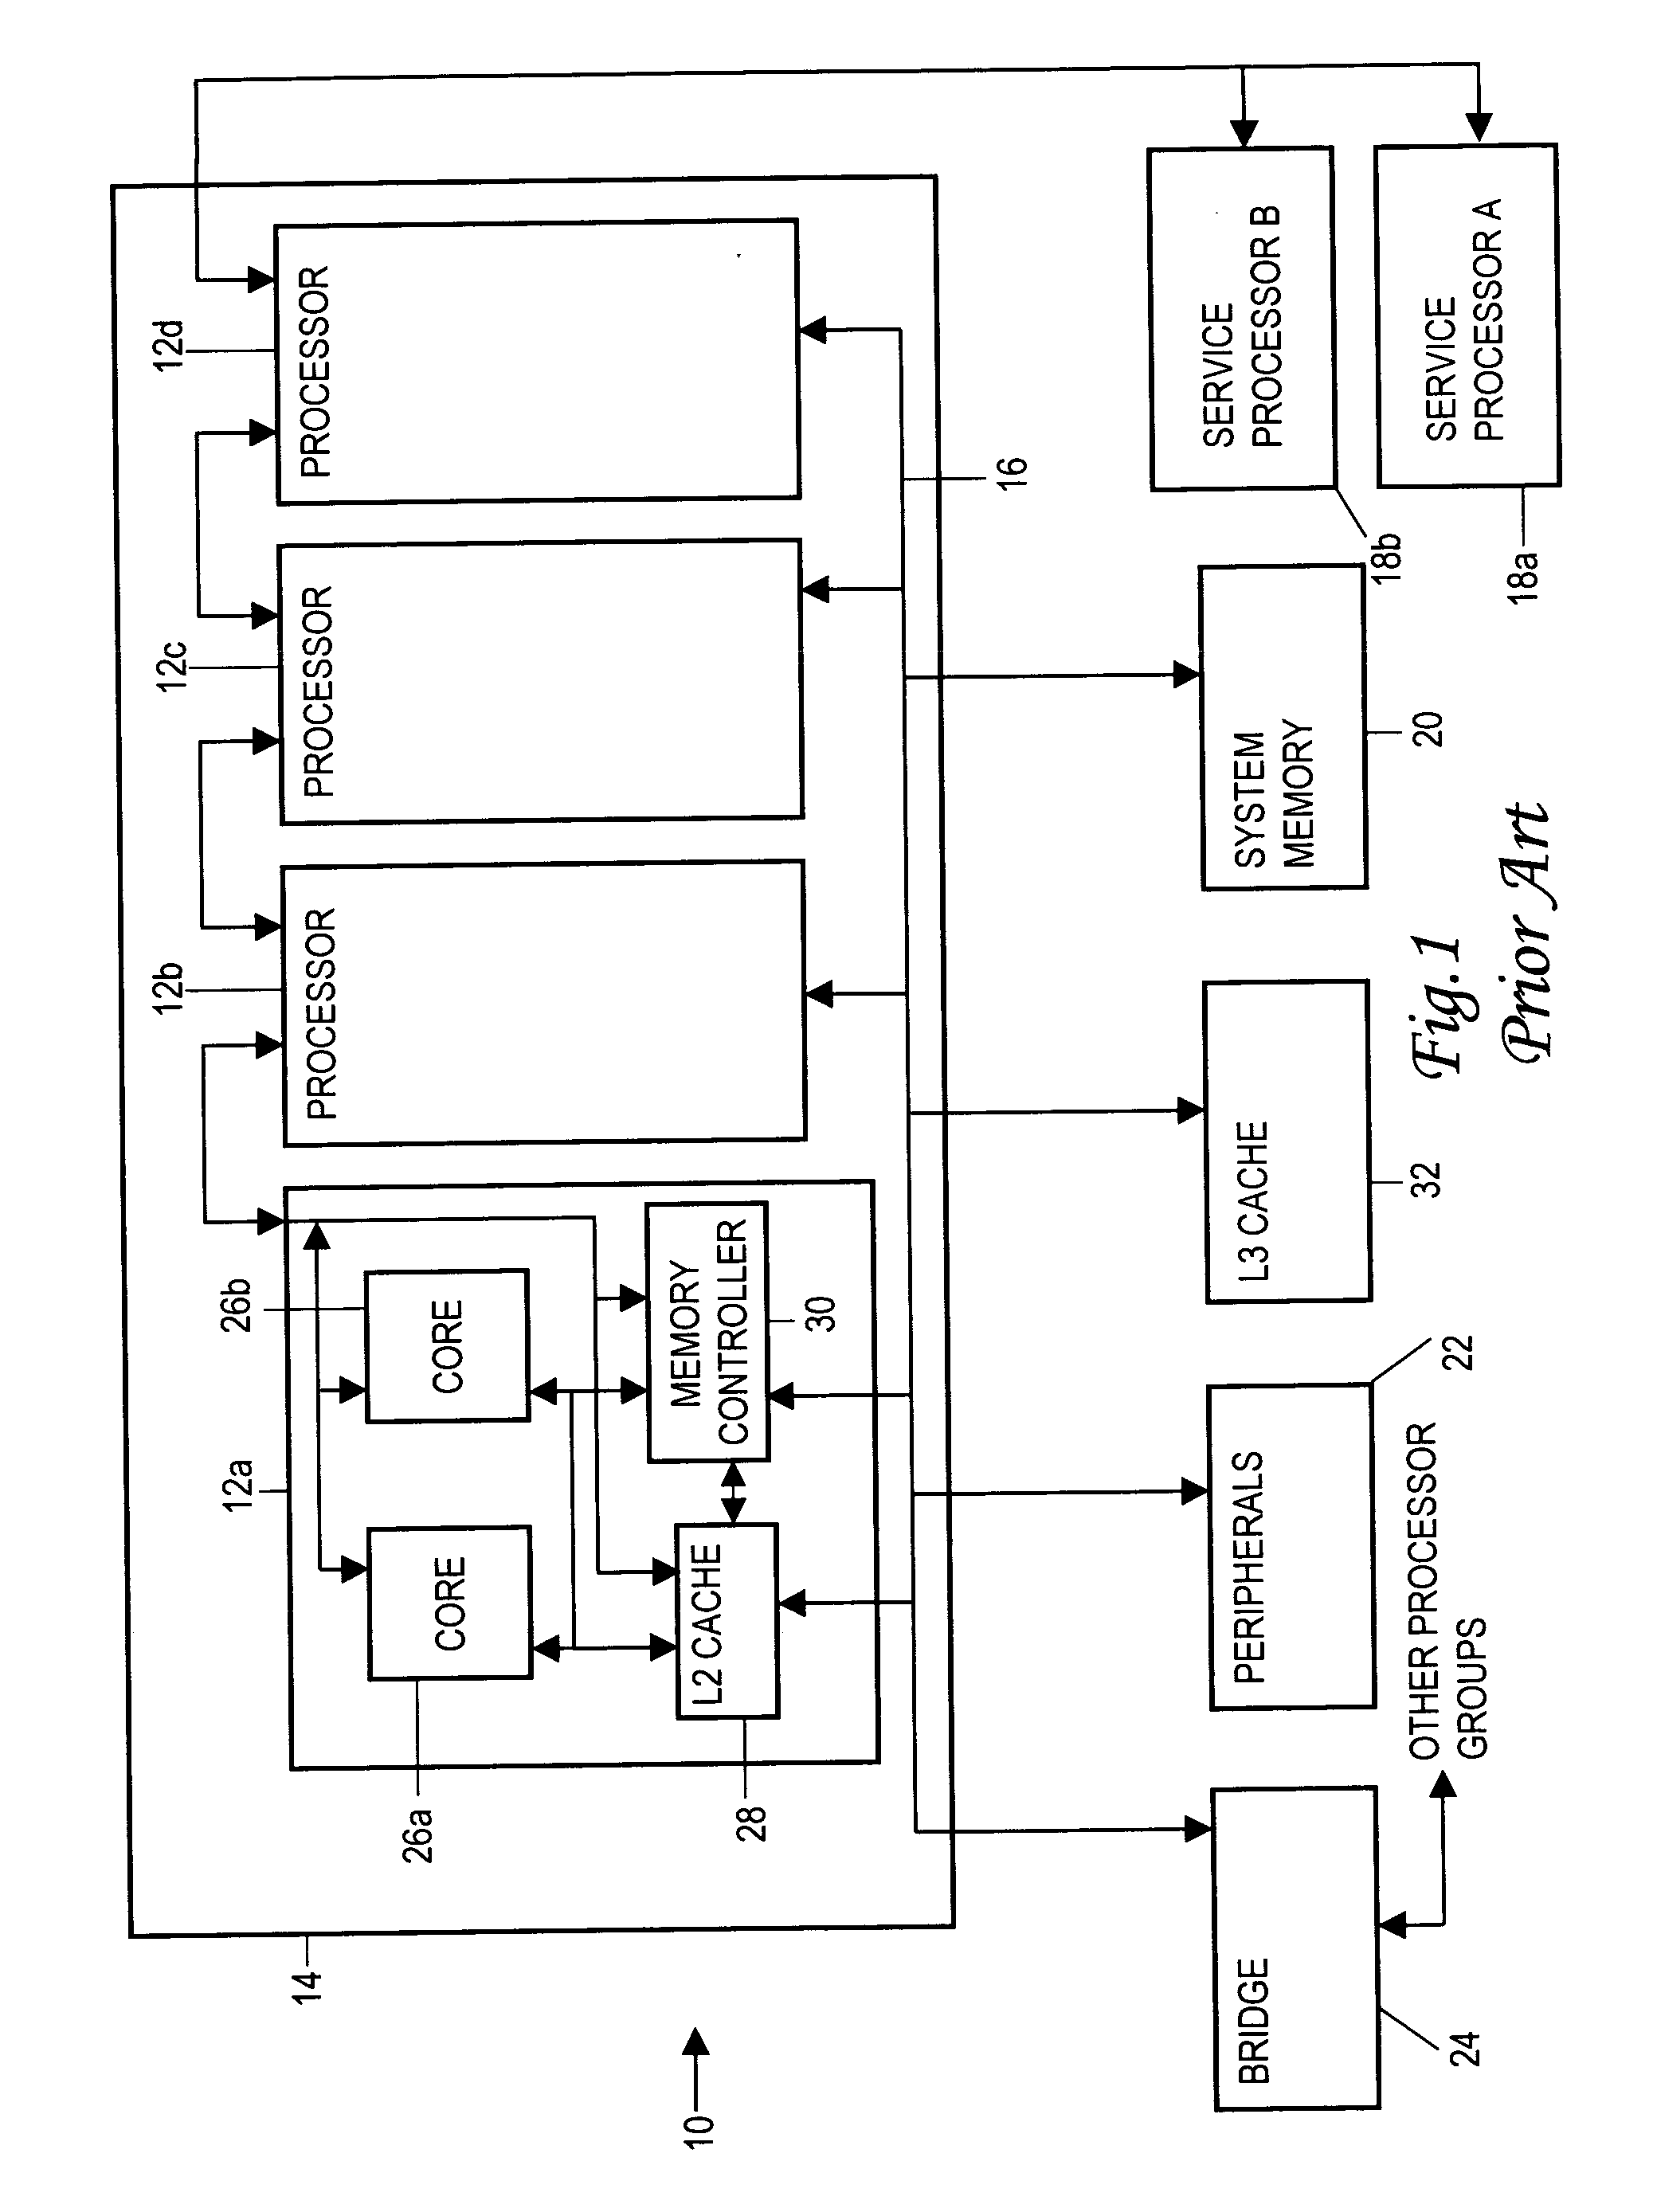 Mechanism for FRU fault isolation in distributed nodal environment